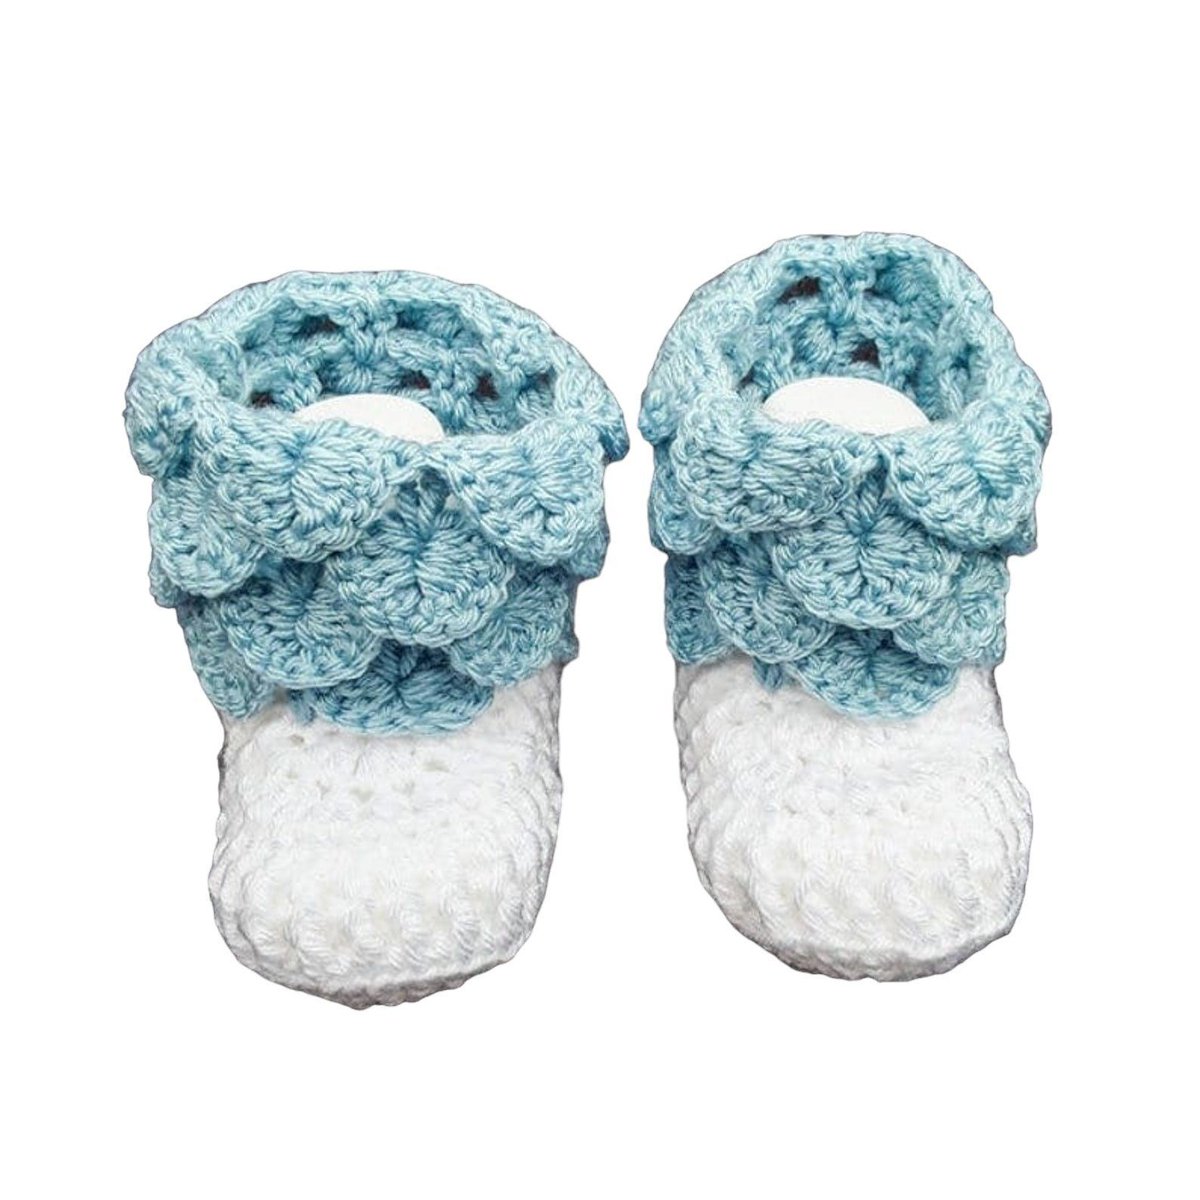 Looking for the perfect baby gift? These blue and white crochet baby booties are just what you need. Handmade and perfect for 6-9 months old. Shop now on #Etsy! #babybooties #handmade knittingtopia.etsy.com/listing/169414… #knittingtopia #MHHSBD #craftbizparty #babyessentials #shophandmade